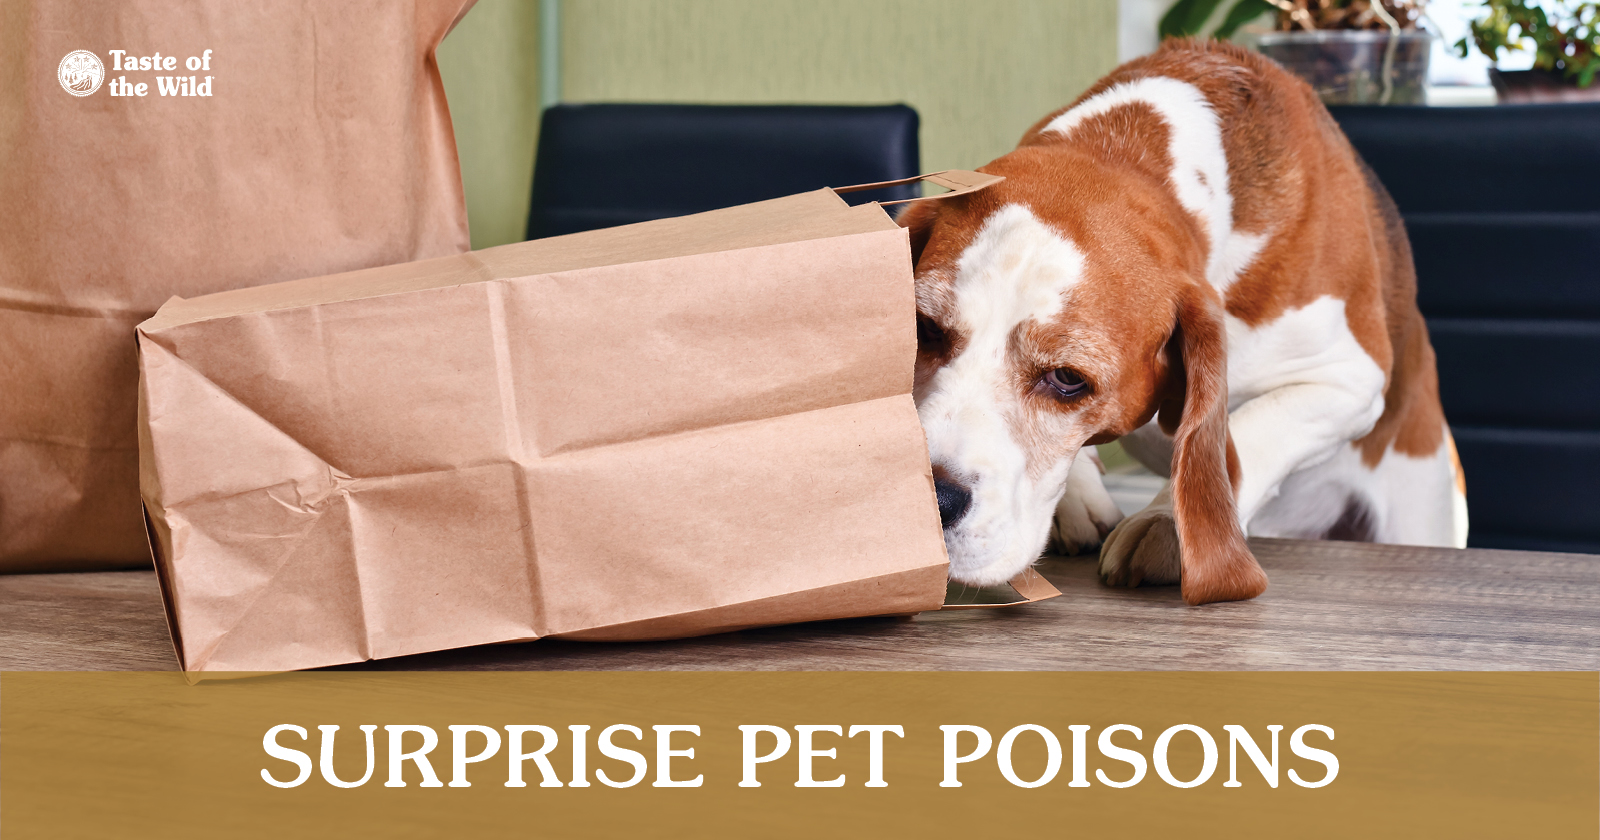 Dog Sniffing Inside Paper Bag Graphic | Taste of the Wild